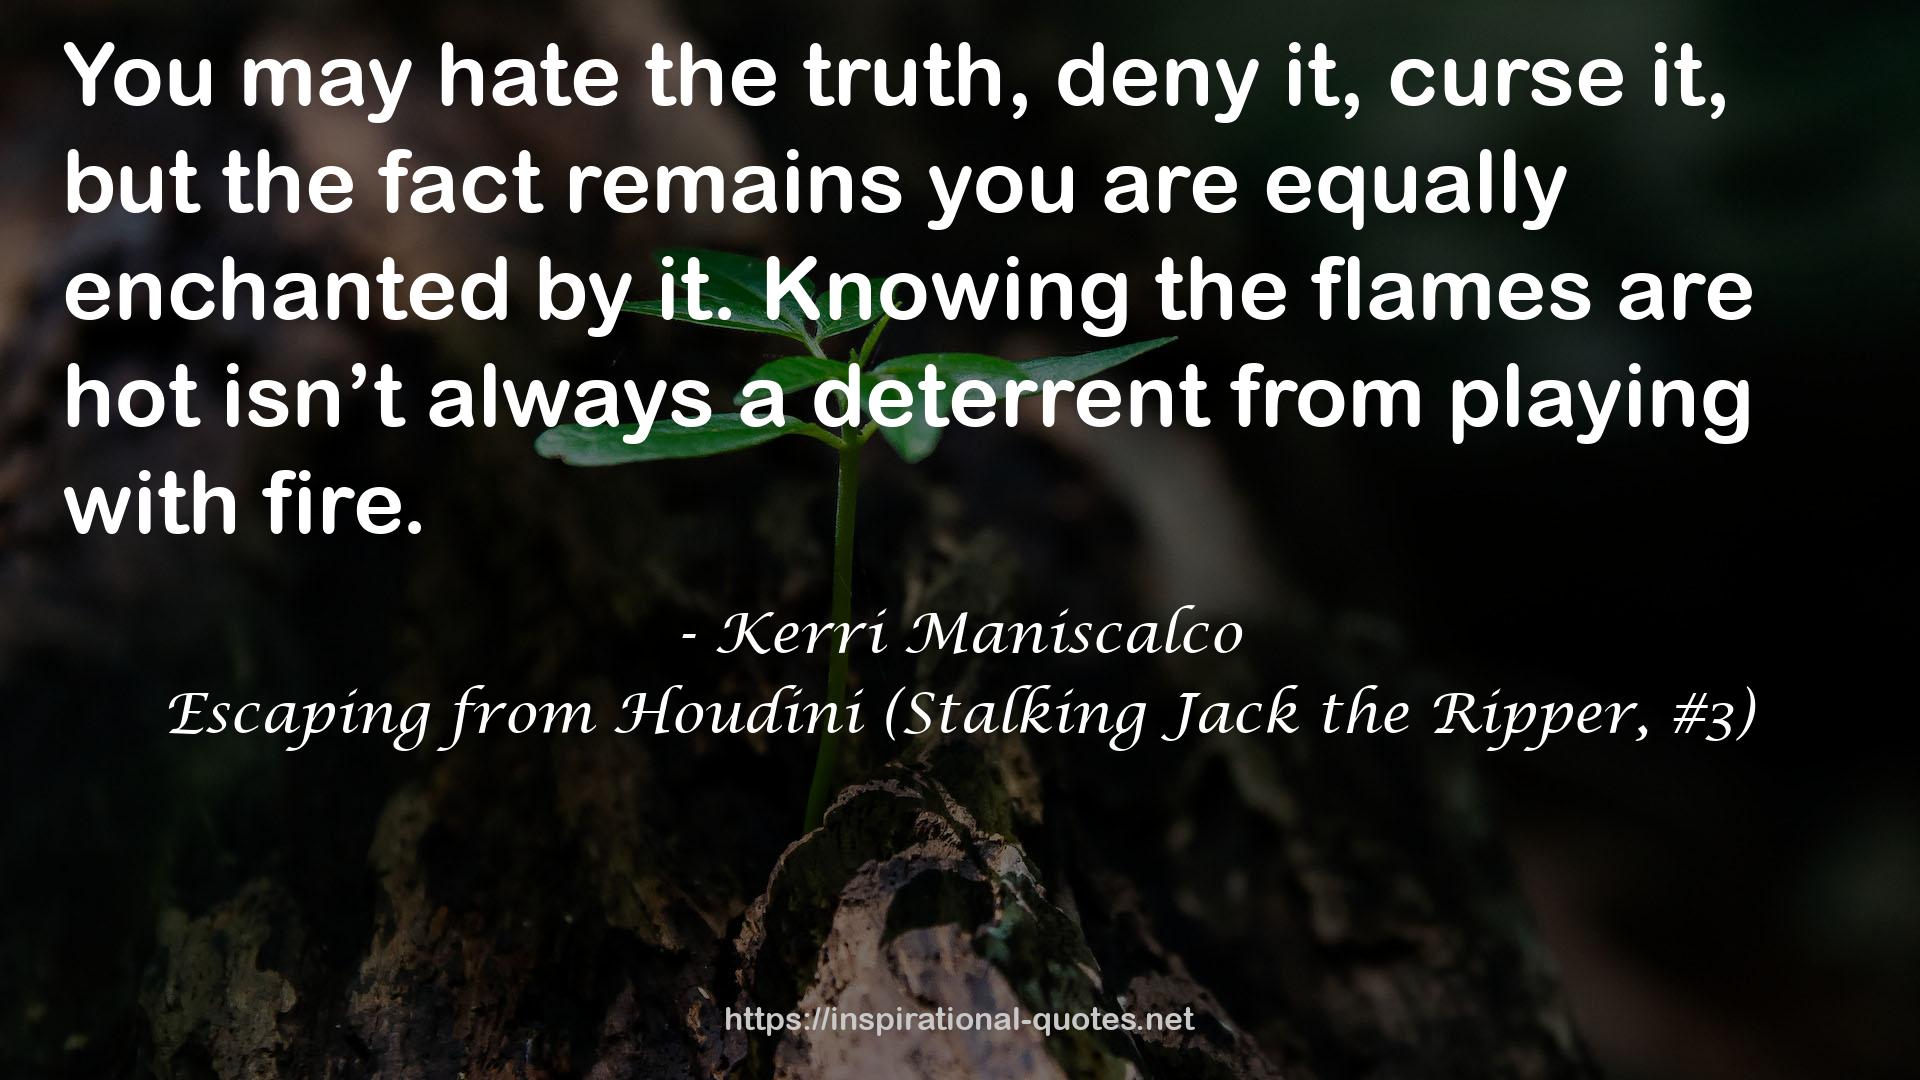 Escaping from Houdini (Stalking Jack the Ripper, #3) QUOTES